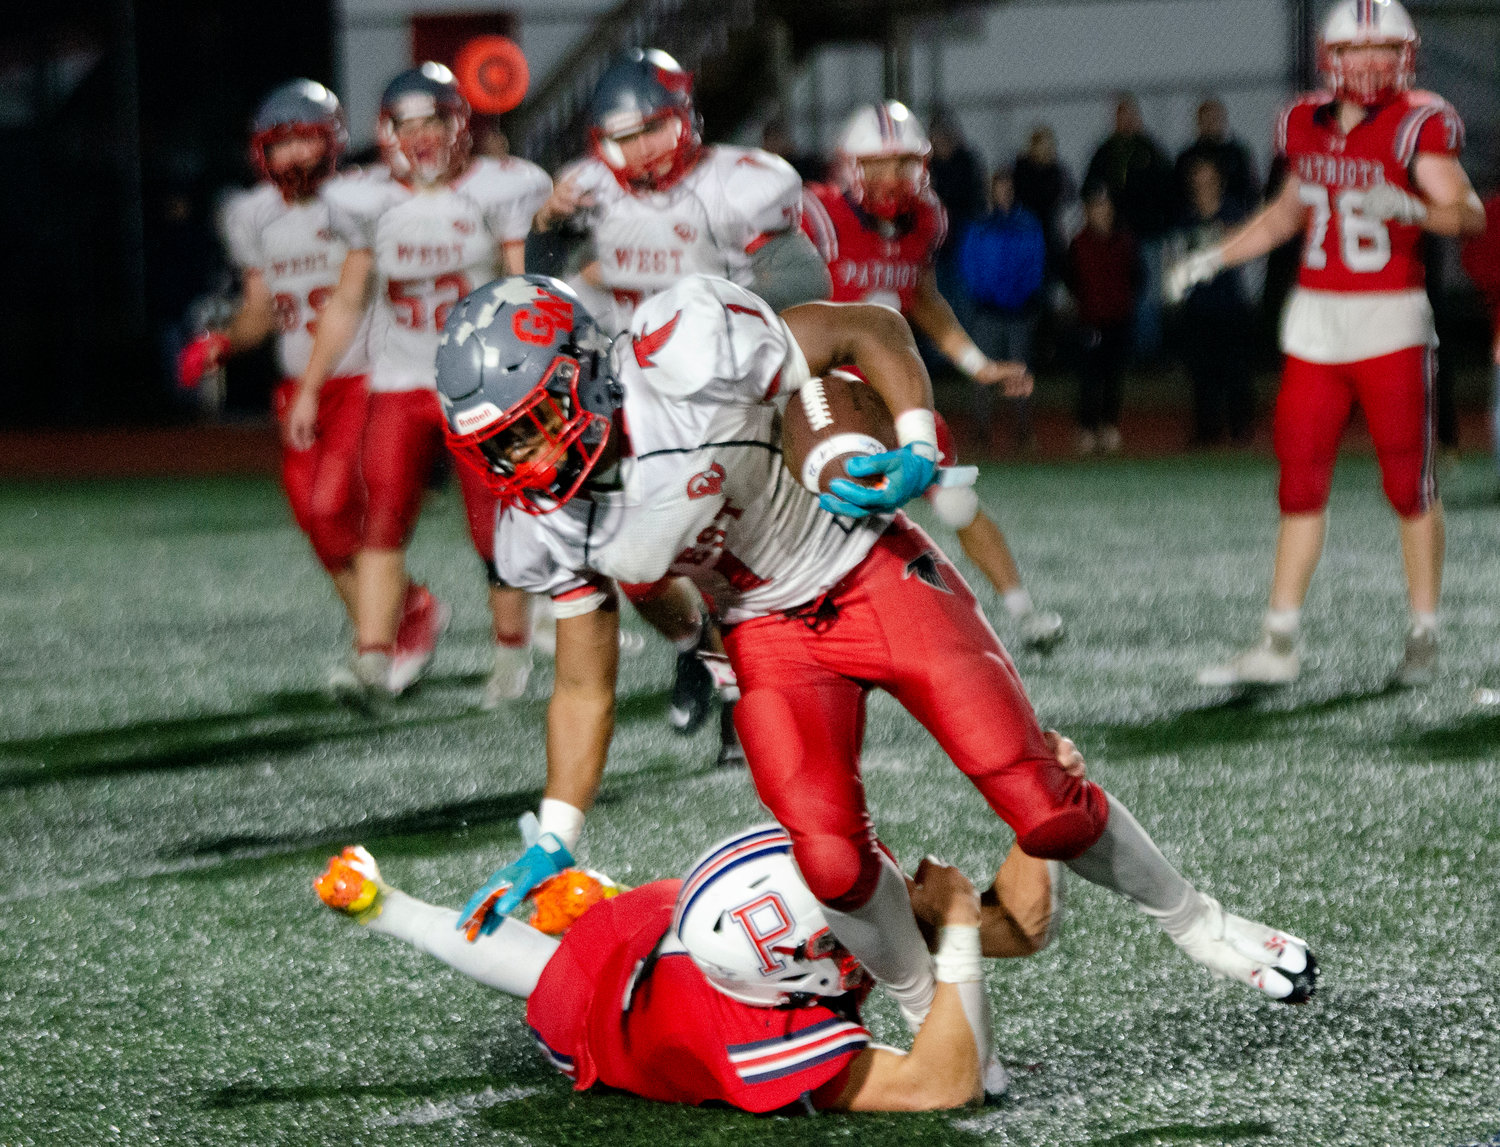 Carson Conheeney makes a tackle on running back Marcus Chung in the second half.